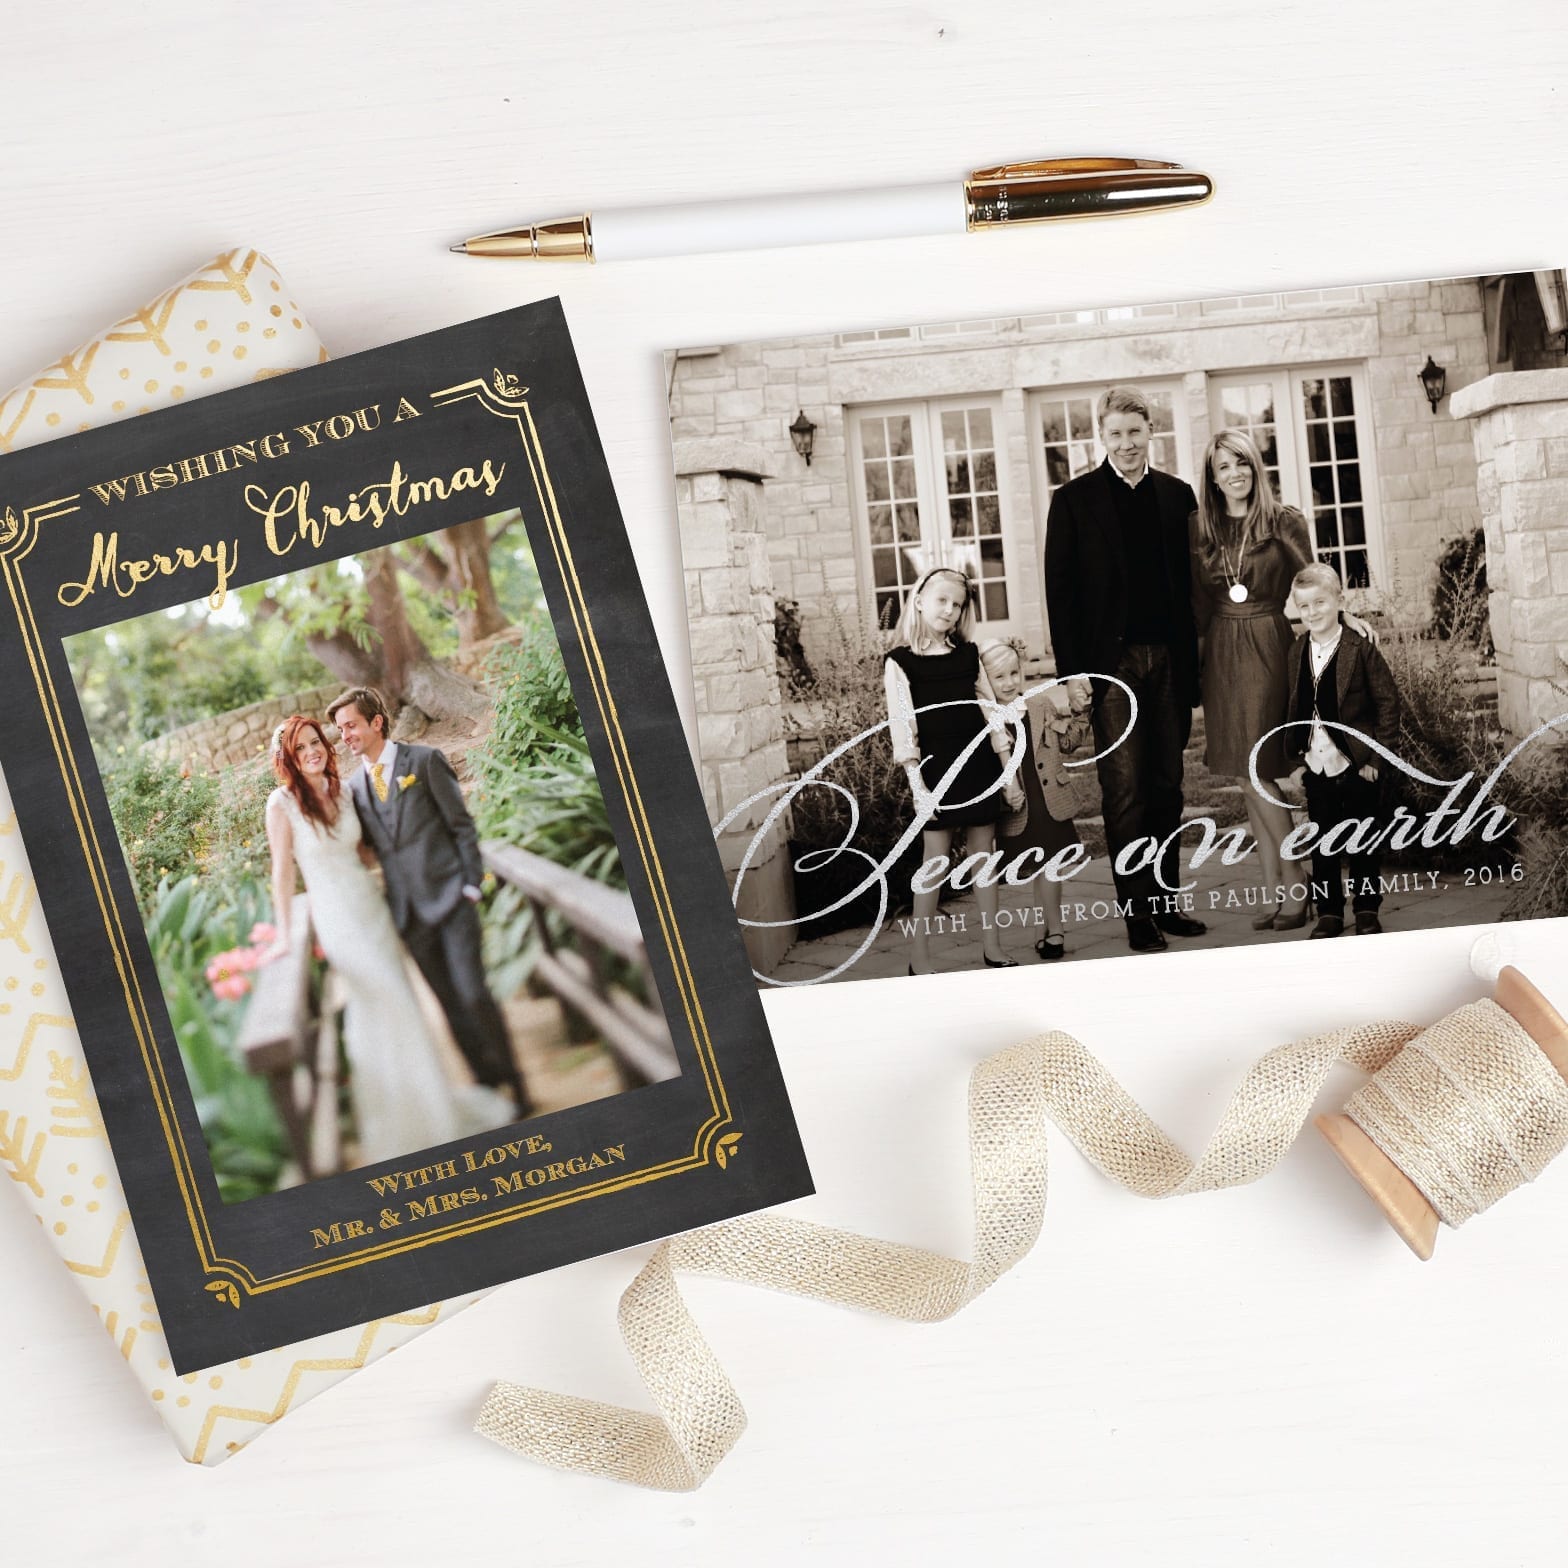 Create your dream invitations, announcements, and Christmas cards with Basic Invite! With over 400 color options, you're sure to make the perfect greeting.